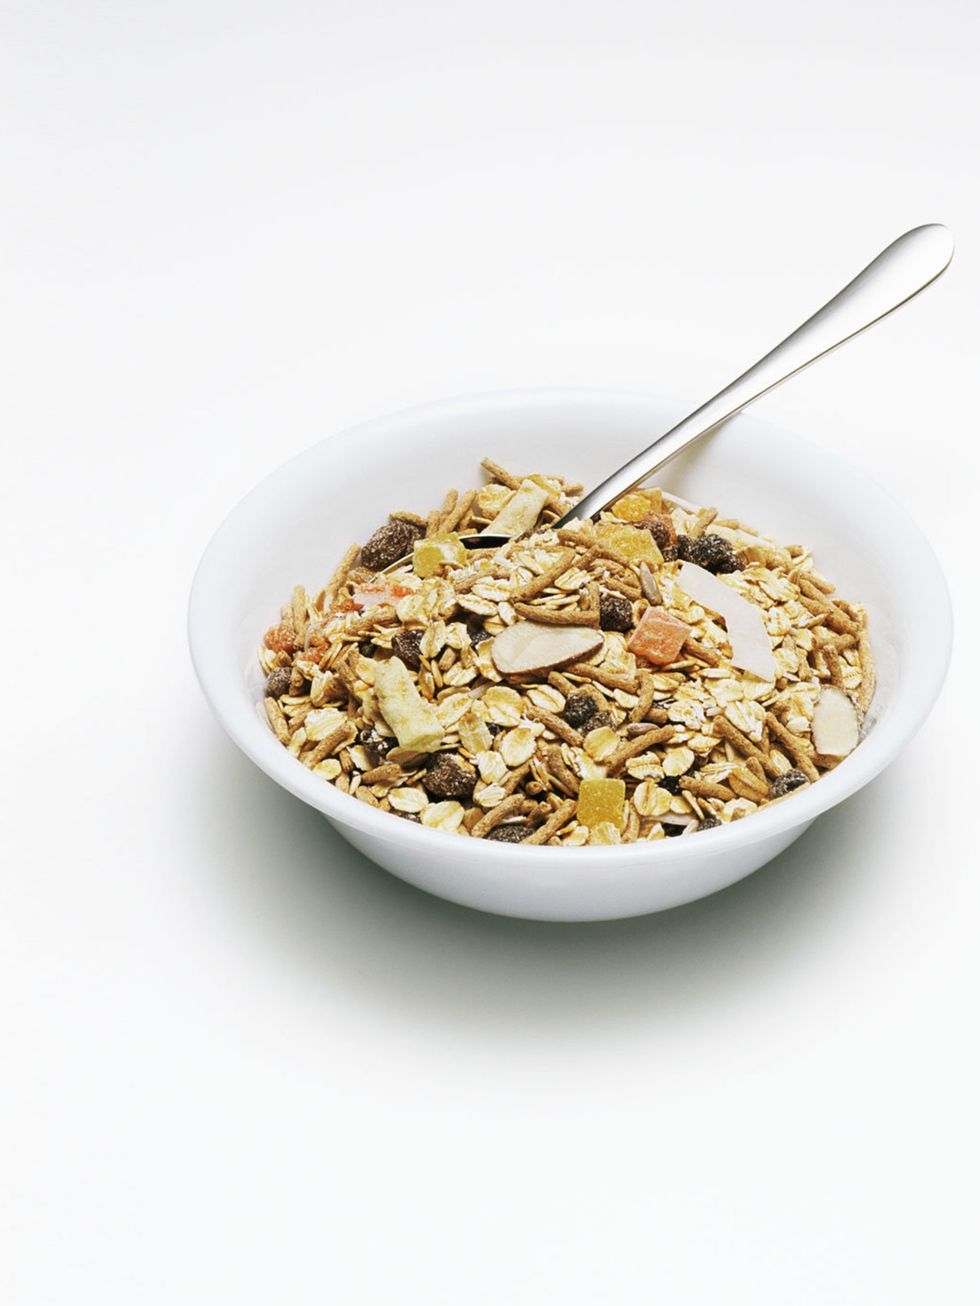 <p><em>Apple Juice Soaked Oat Muesli with fresh fruit</em></p><p><strong>Method:</strong>On Sunday mix the 25g whole rolled oats and 20g sunflower seeds. Pour 50ml apple juice on top until just covering the oats. Cover with cling film and leave in the fri